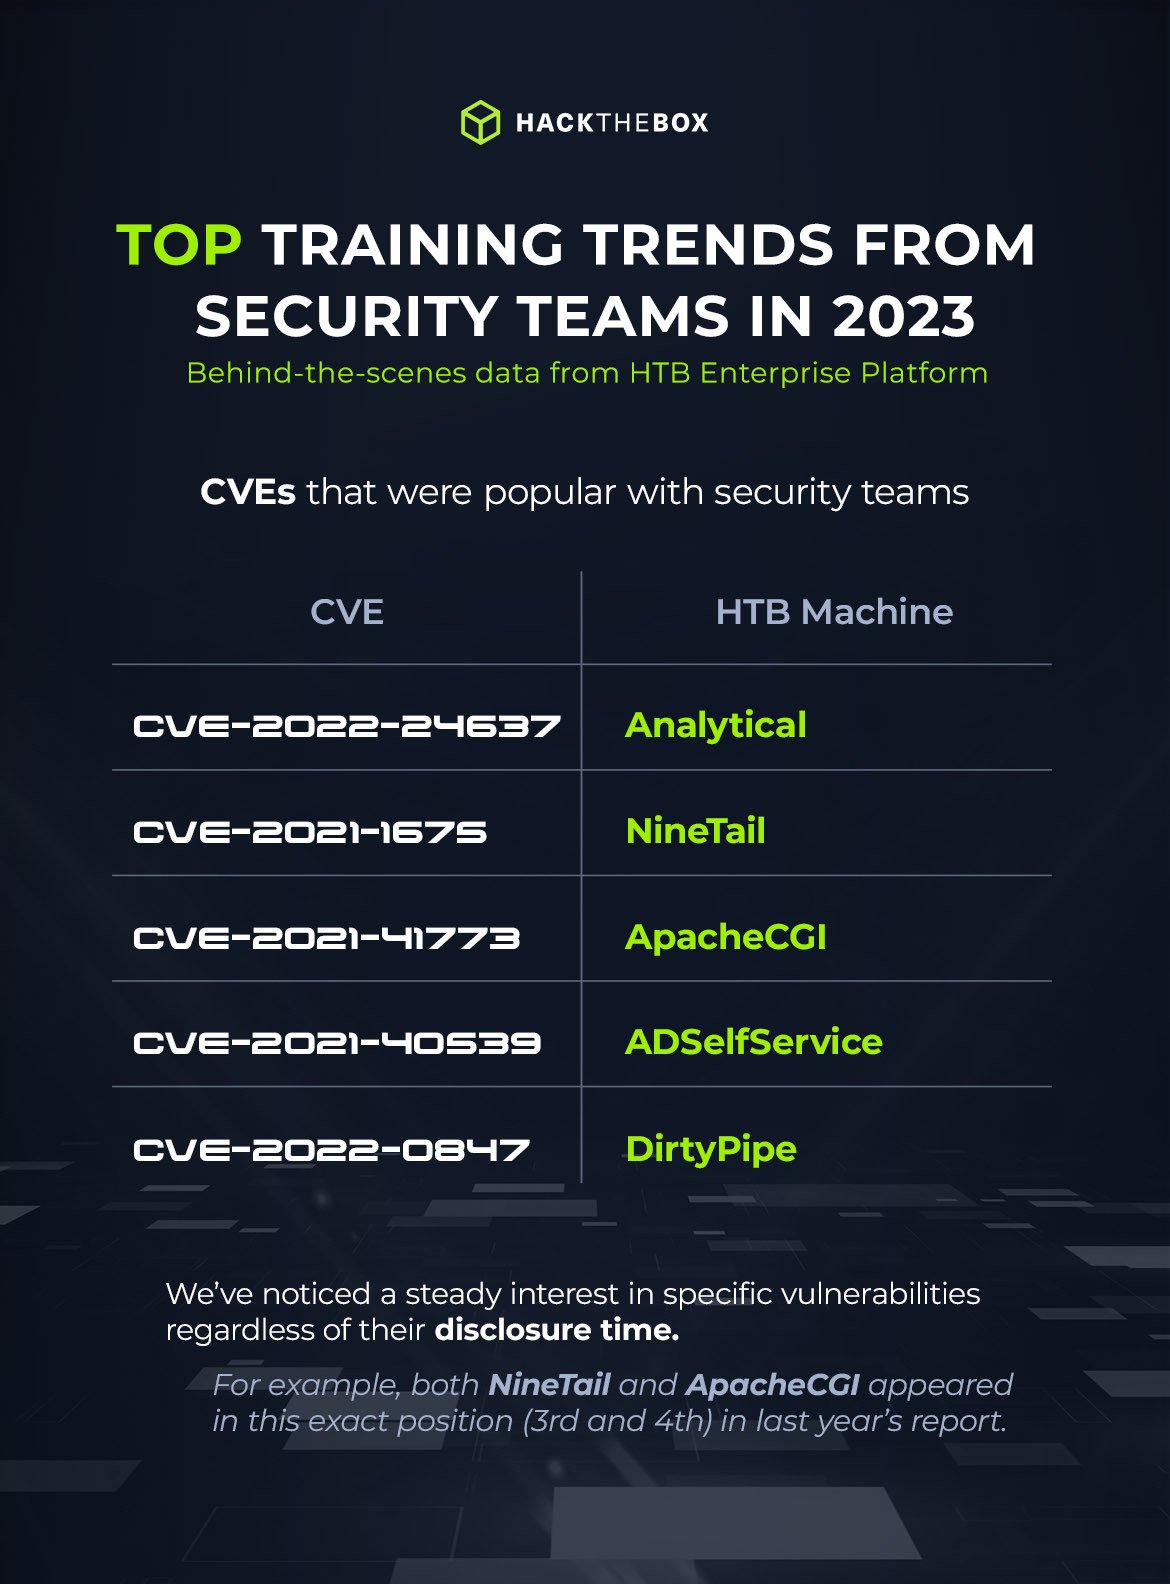 top training trends for CVEs